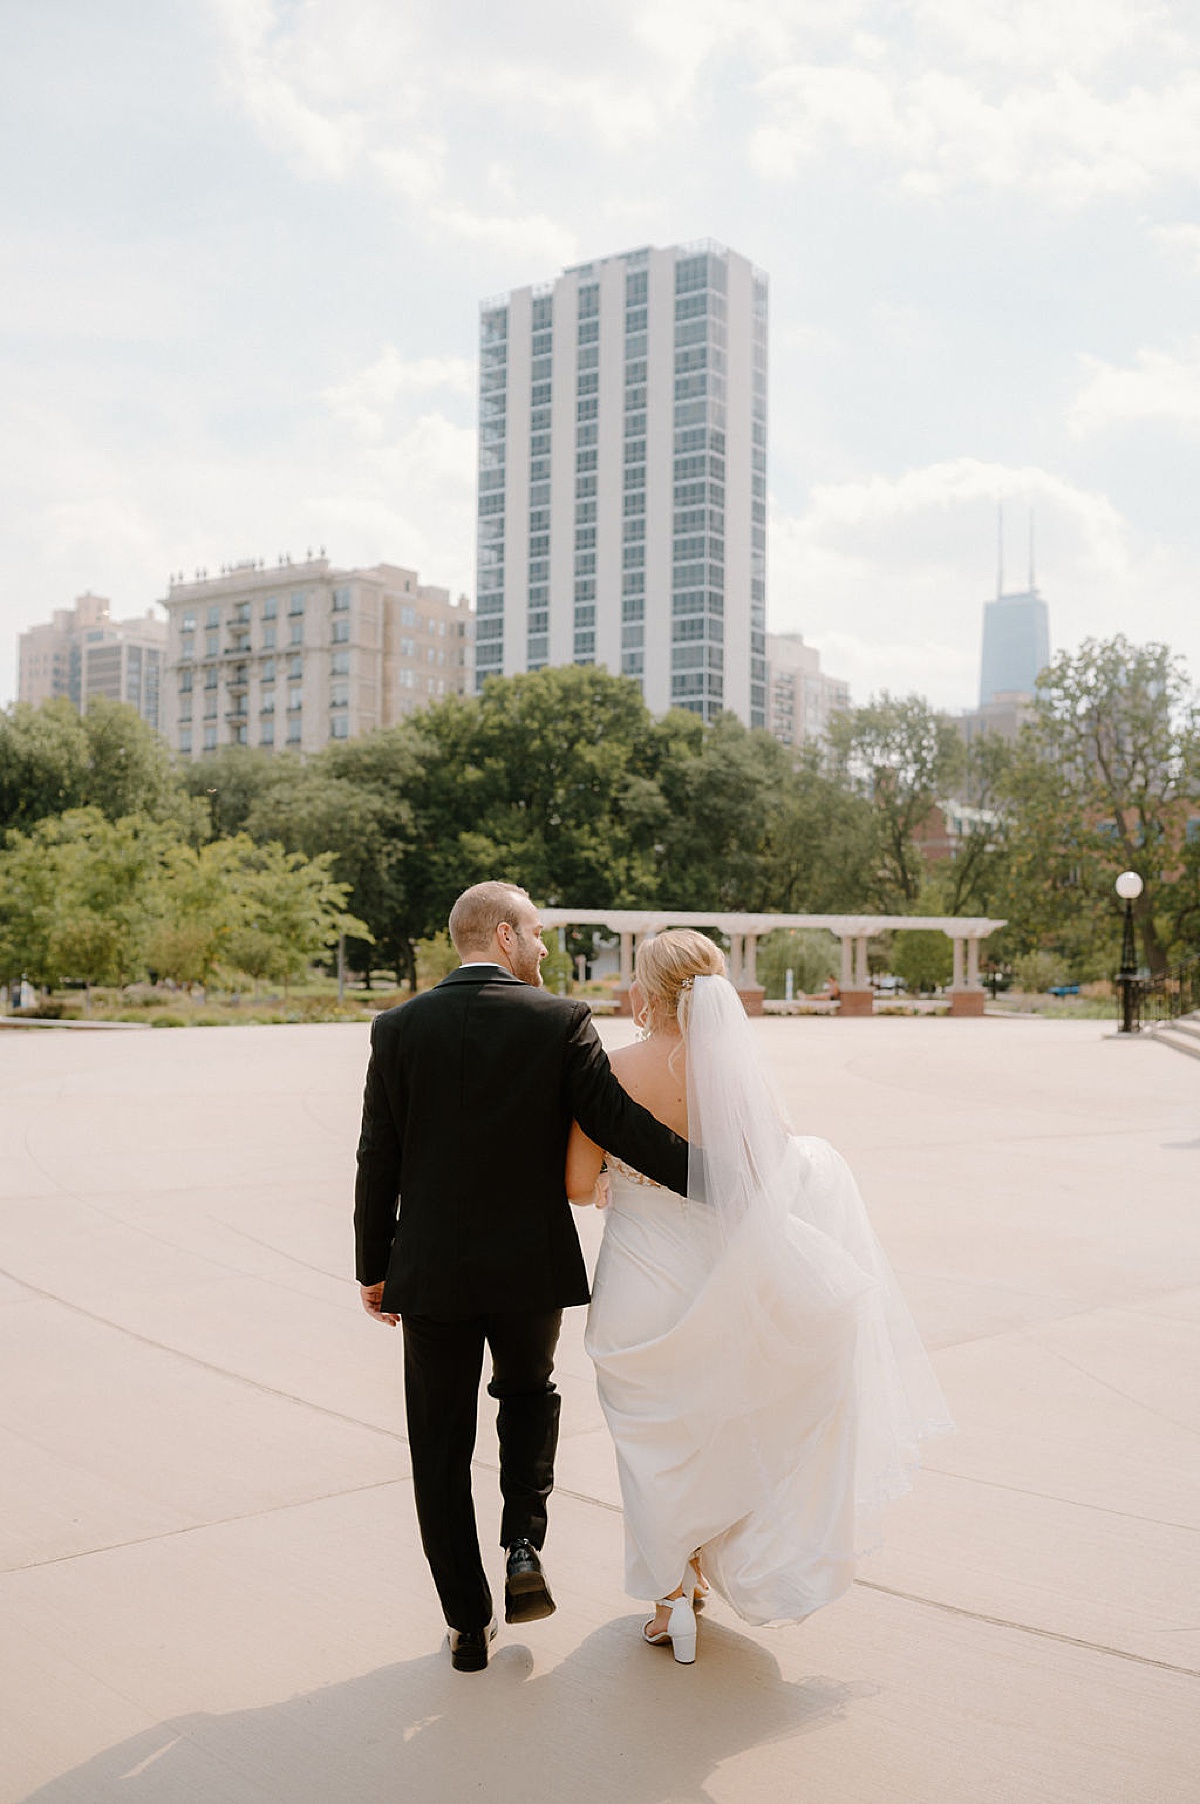 newlywed bride and groom walk through city park after wedding ceremony shot by Indigo Lace Collective